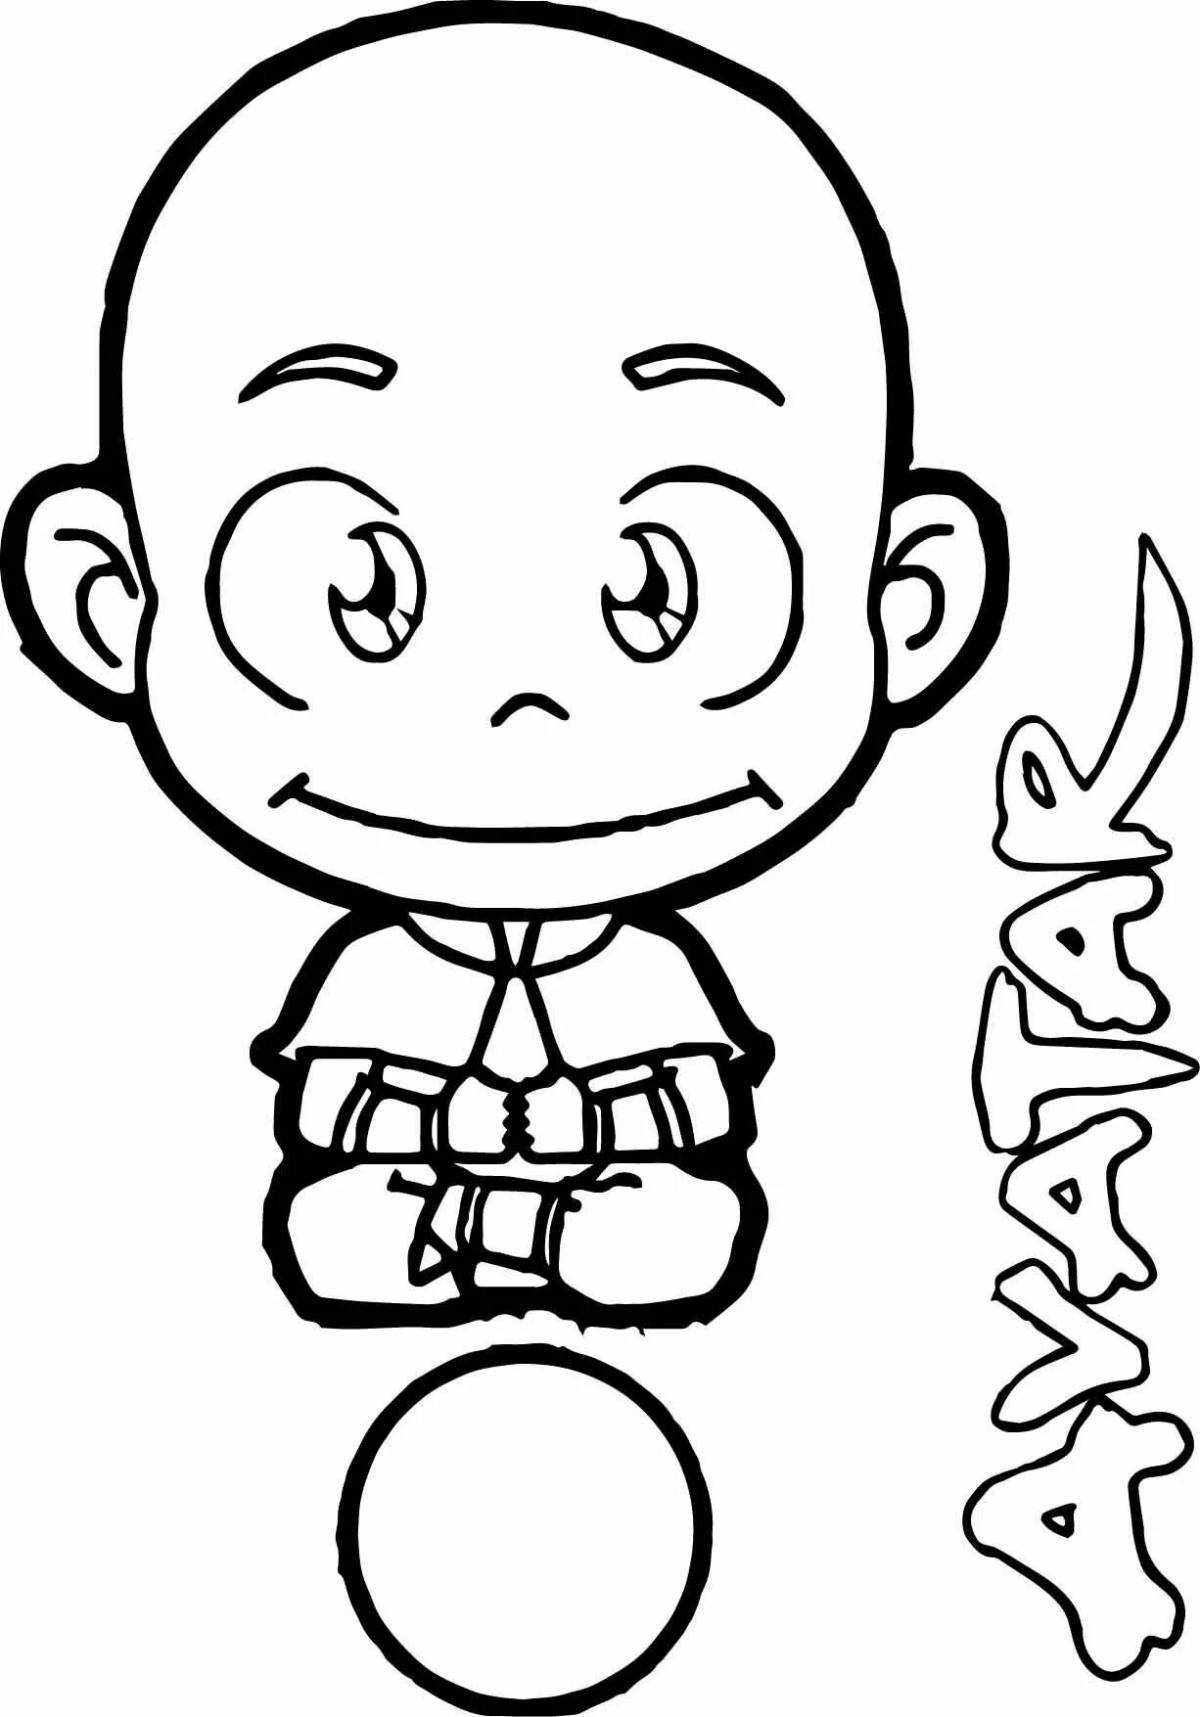 Aang's glitter coloring